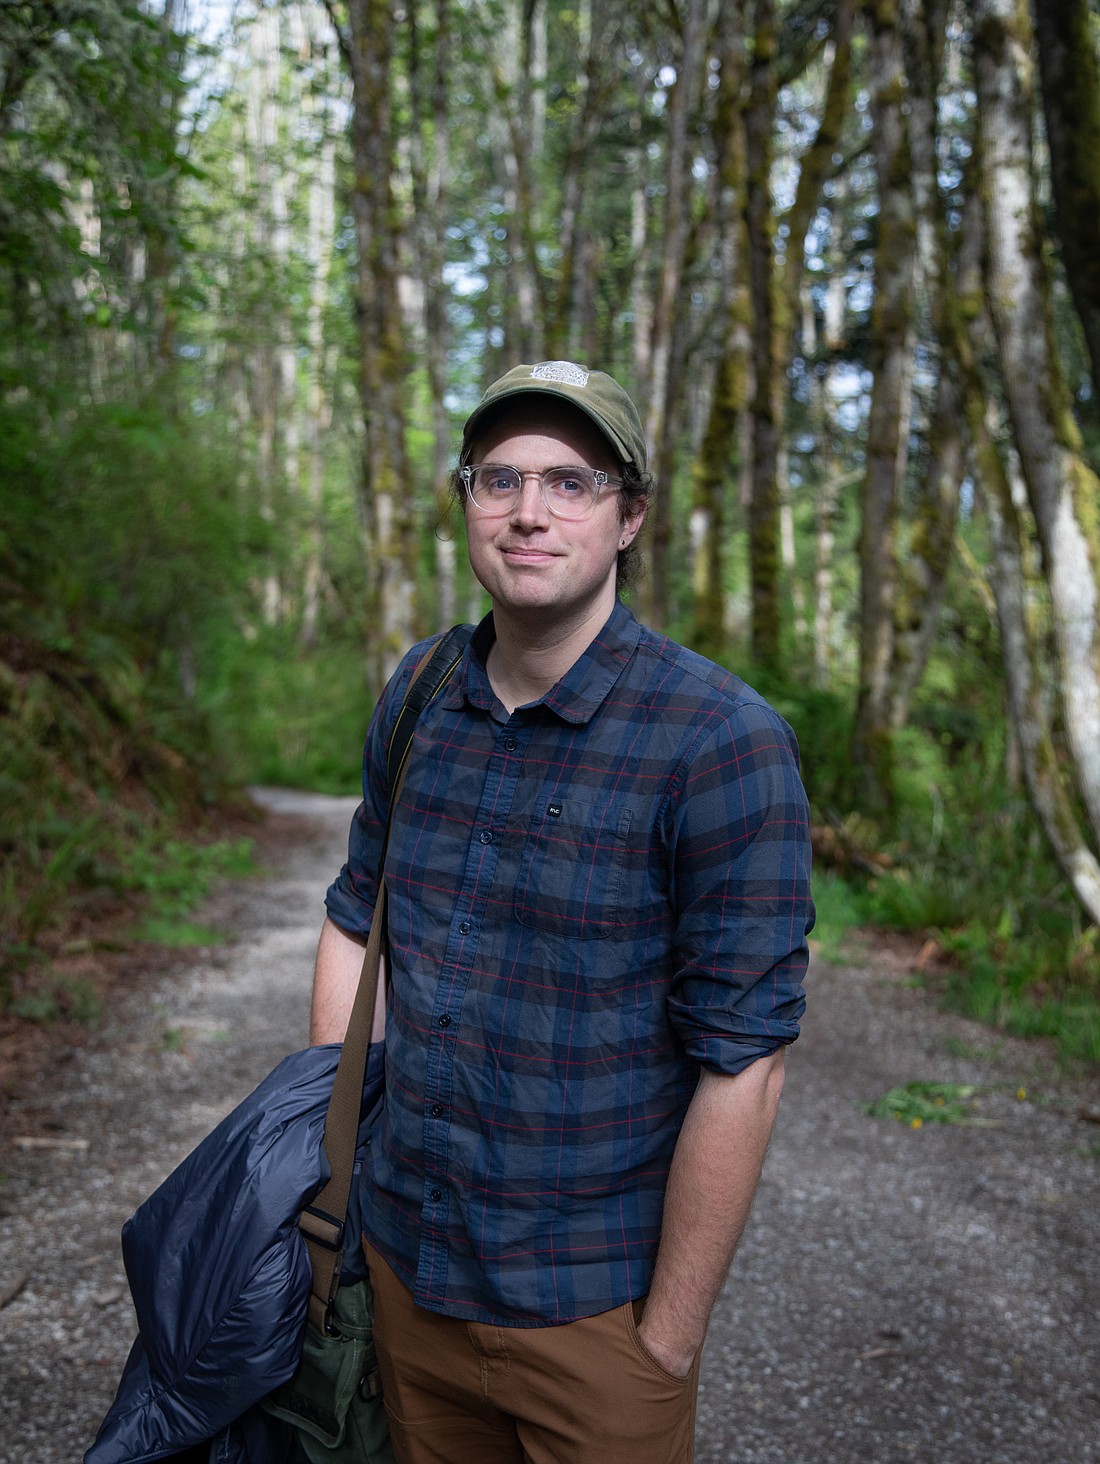 Luke Hollister is the photographer for Western Washington University. He moved to Bellingham about a year ago to "live somewhere that I wanted to live," he said.